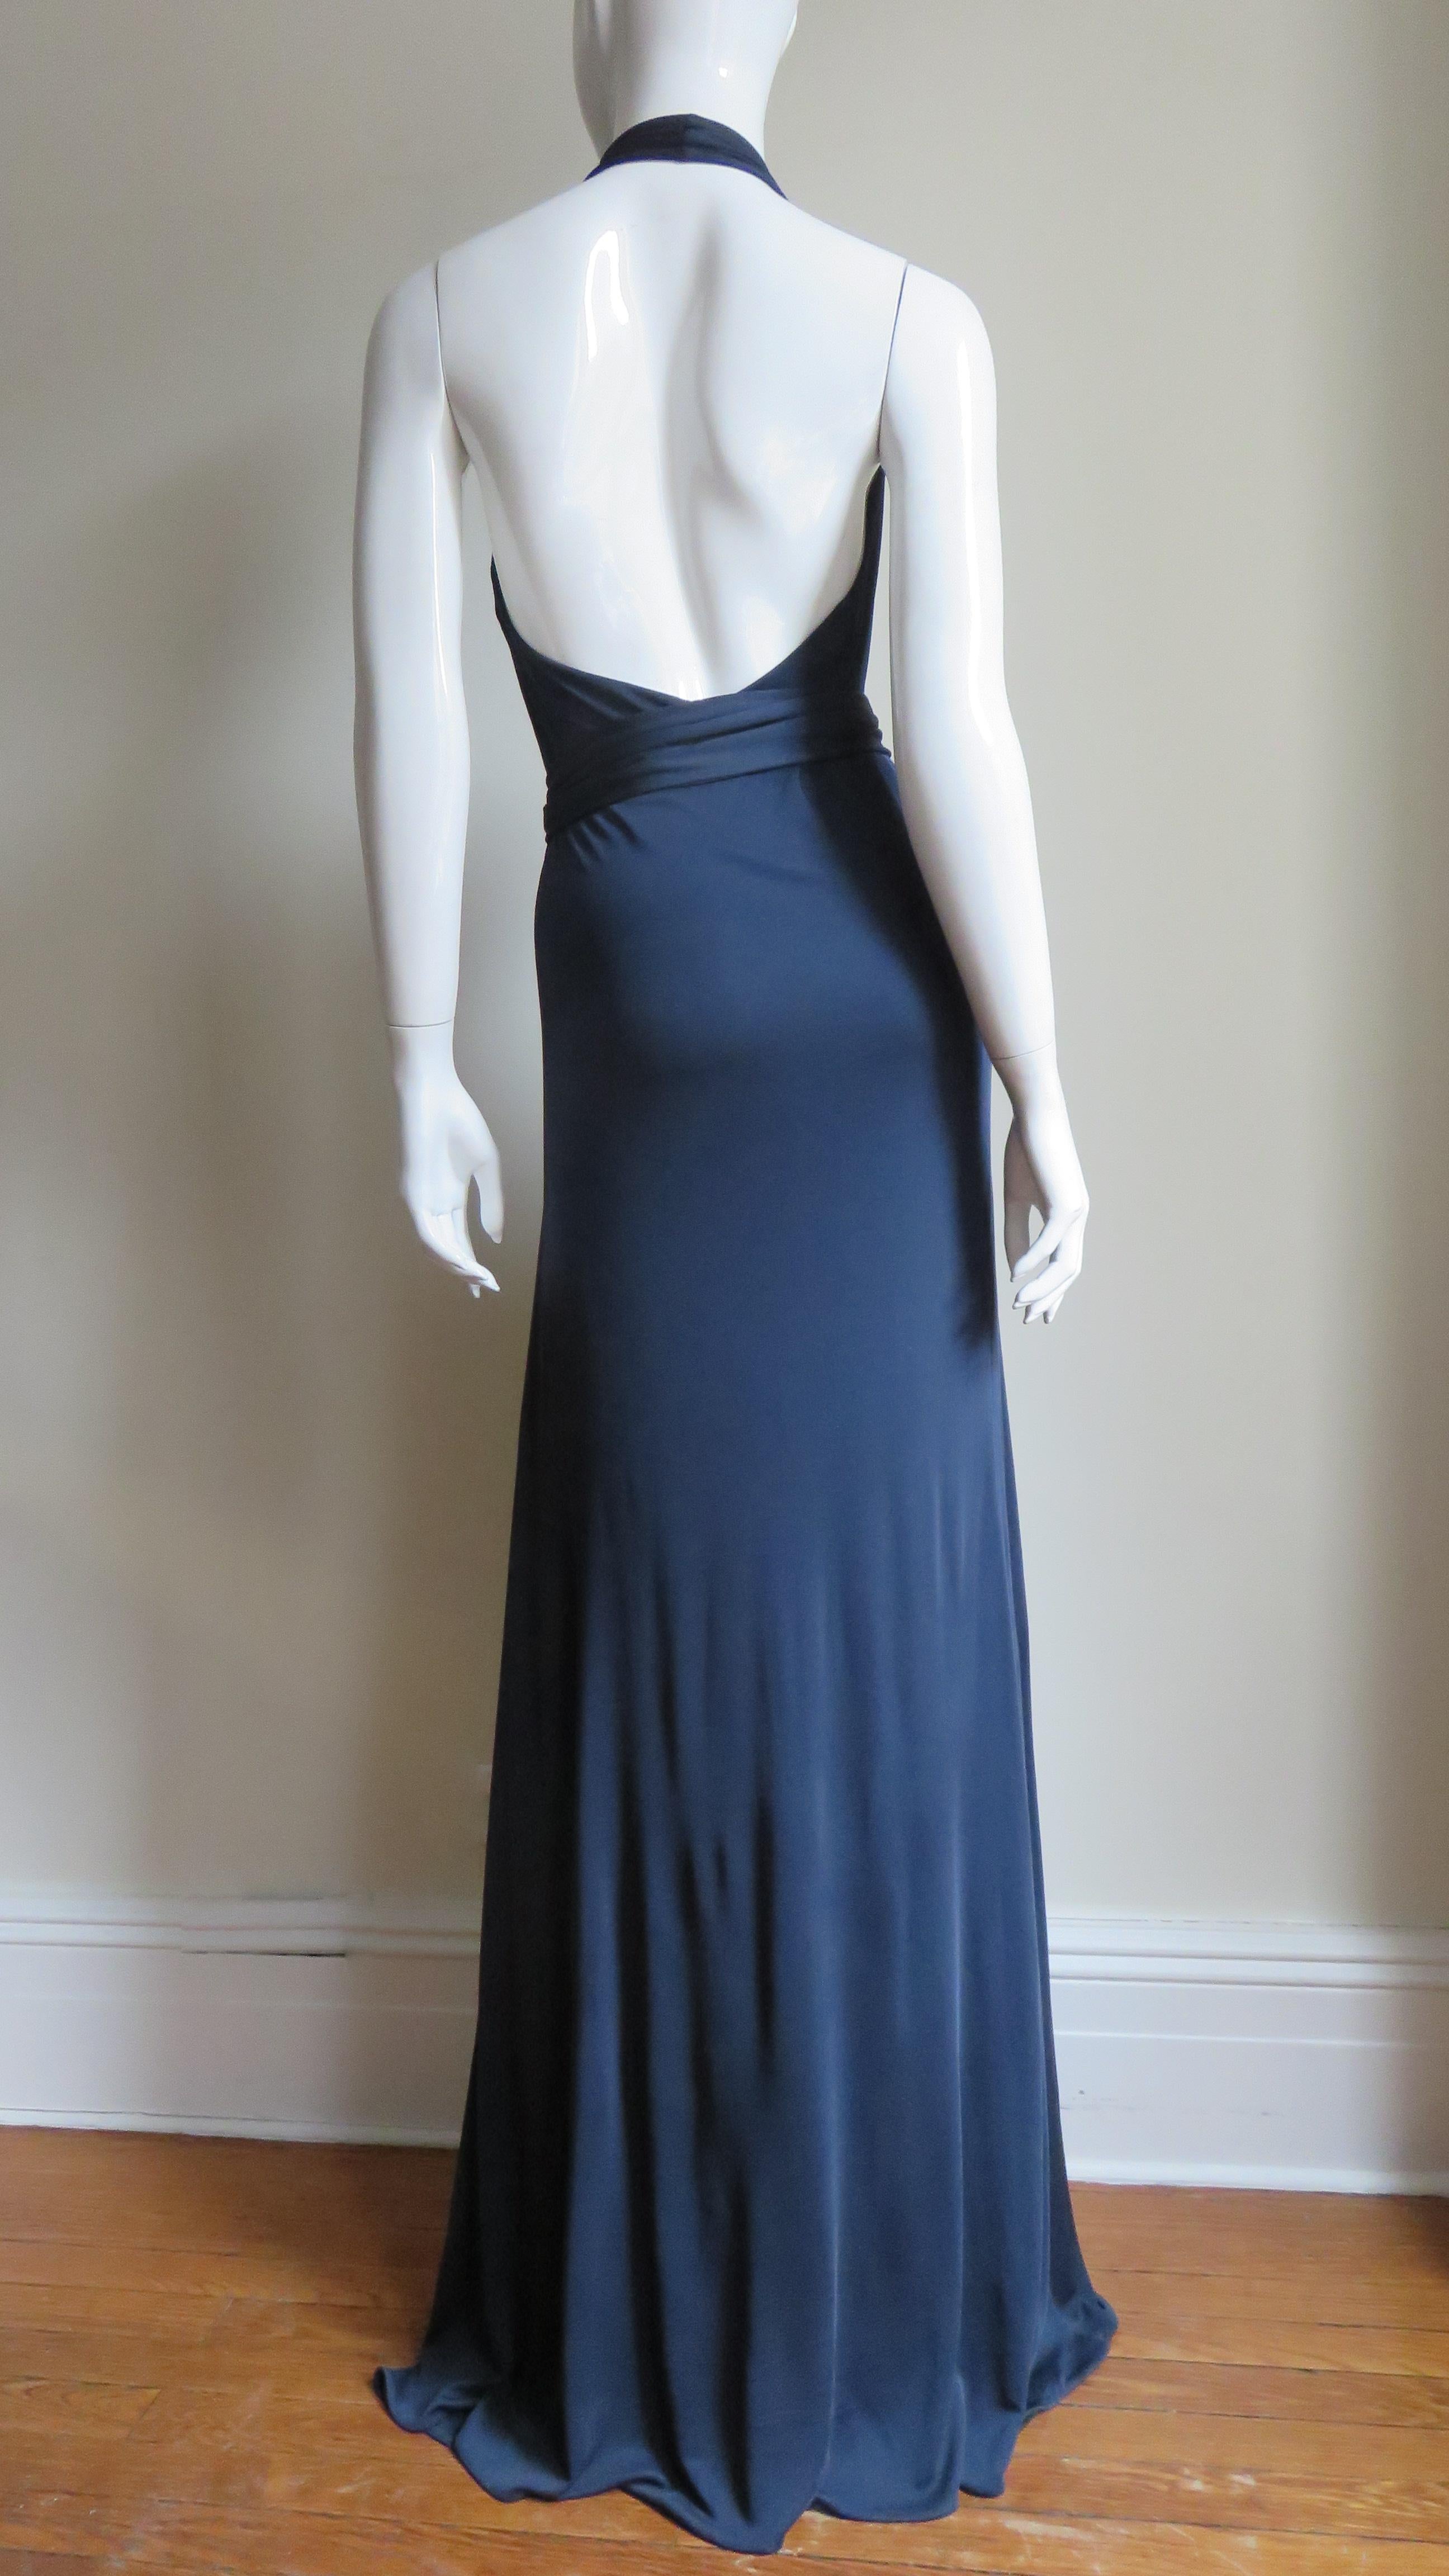 Women's Tom Ford for Gucci Navy Silk Wrap Halter Dress